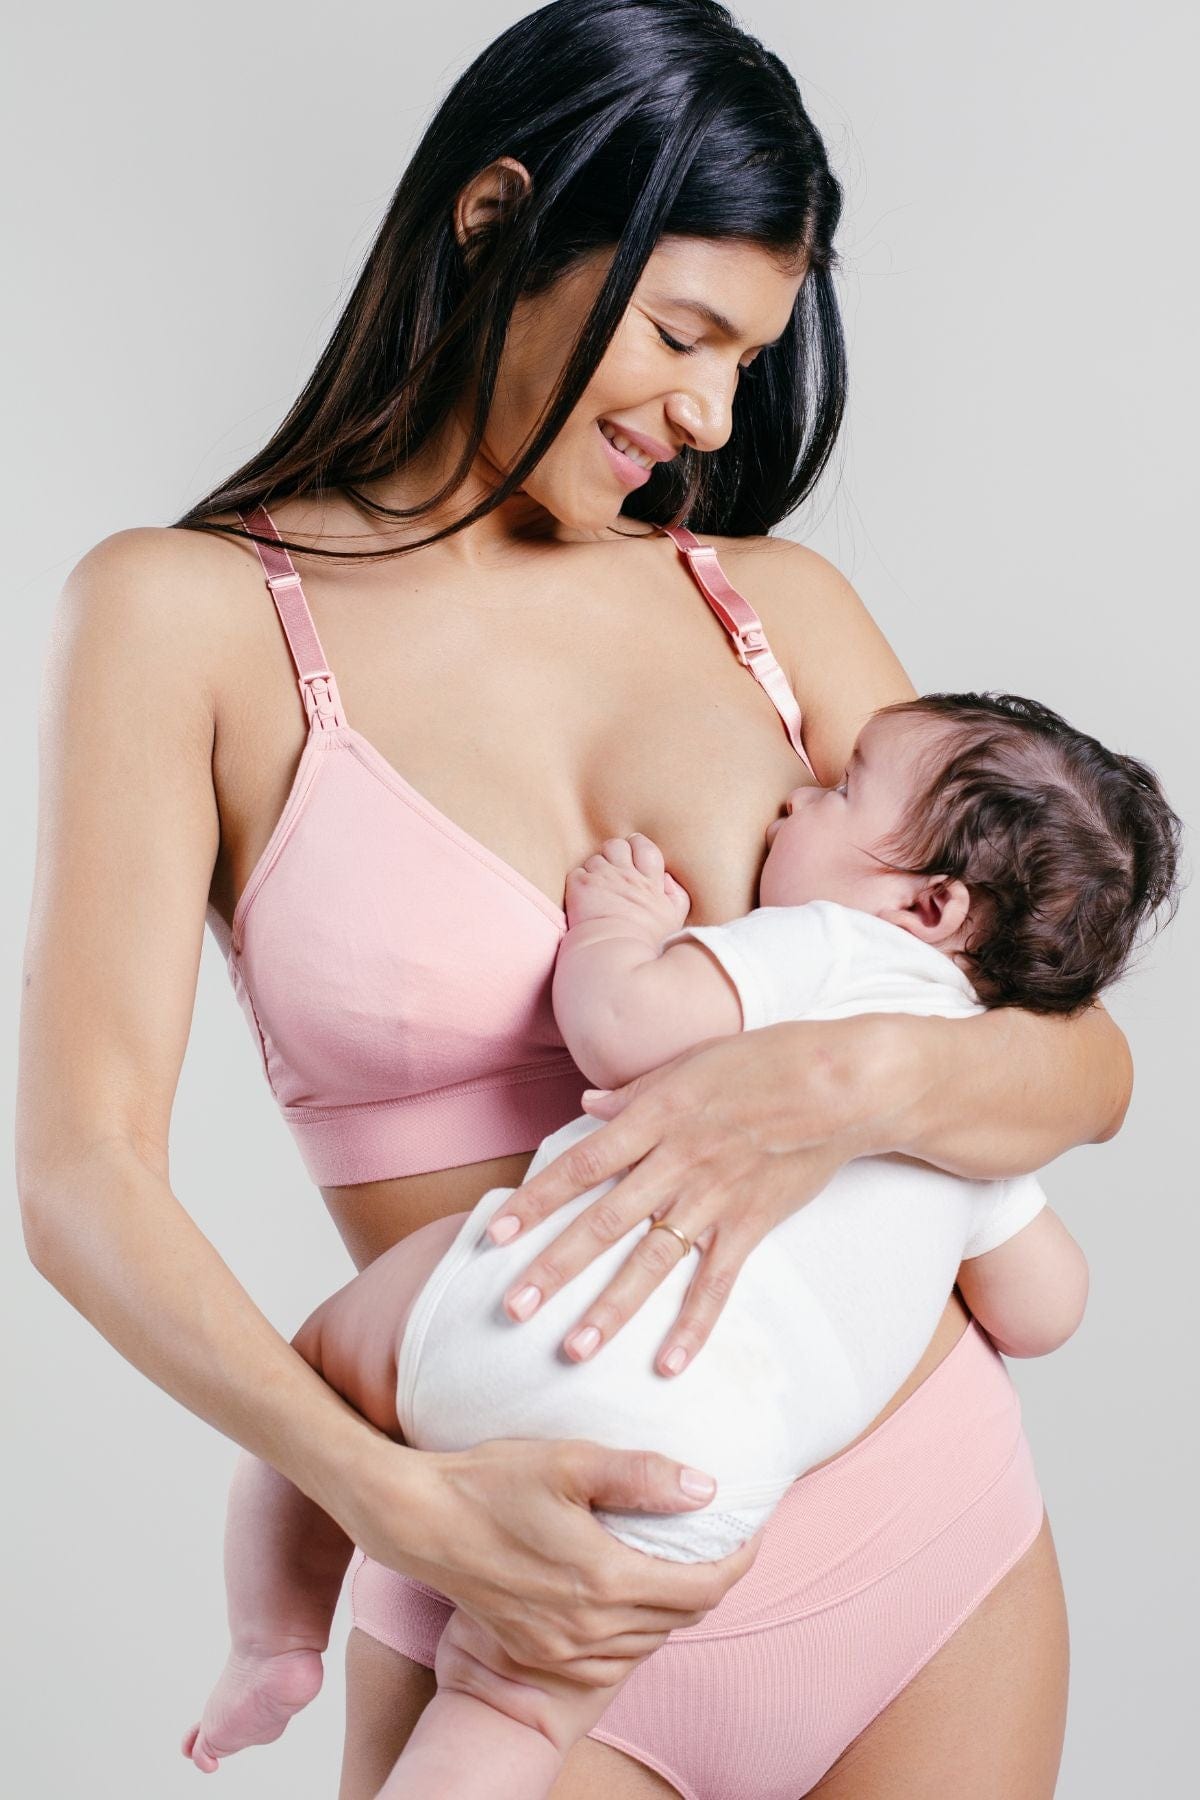 Simple Wishes Women's All-in-one Supermom Nursing And Pumping